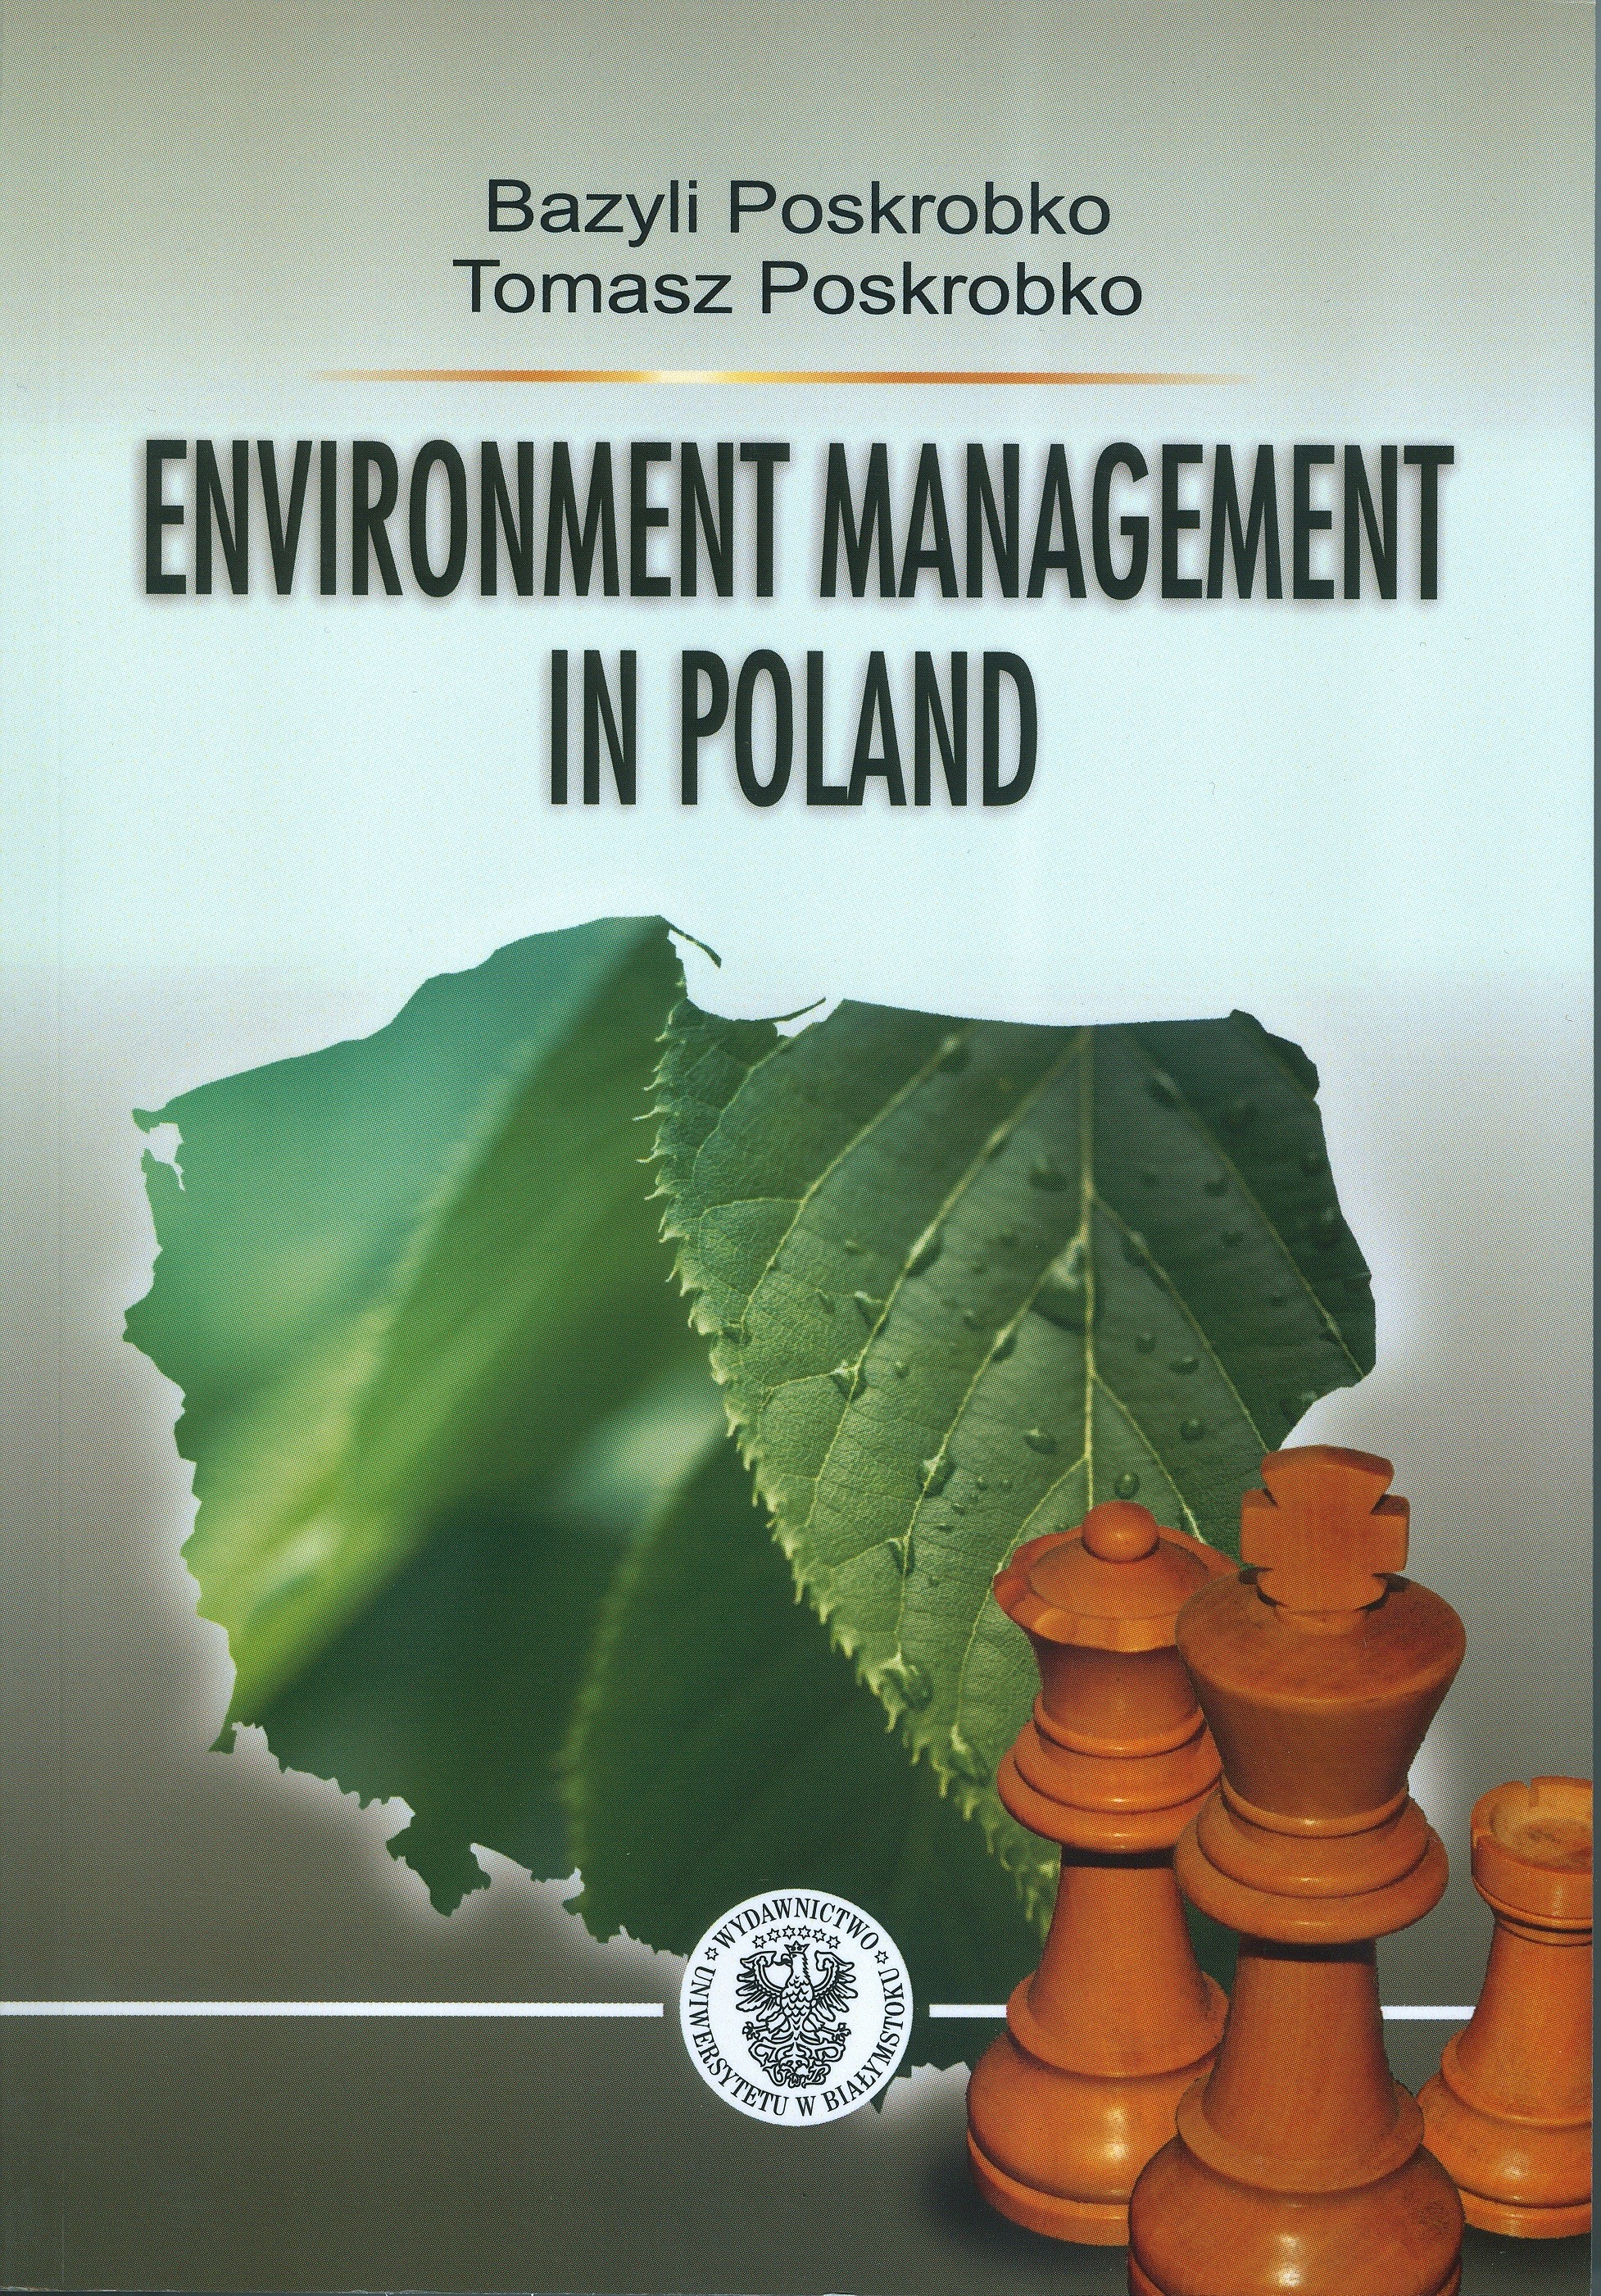 ENVIRONMENT MANAGEMENT IN POLAND